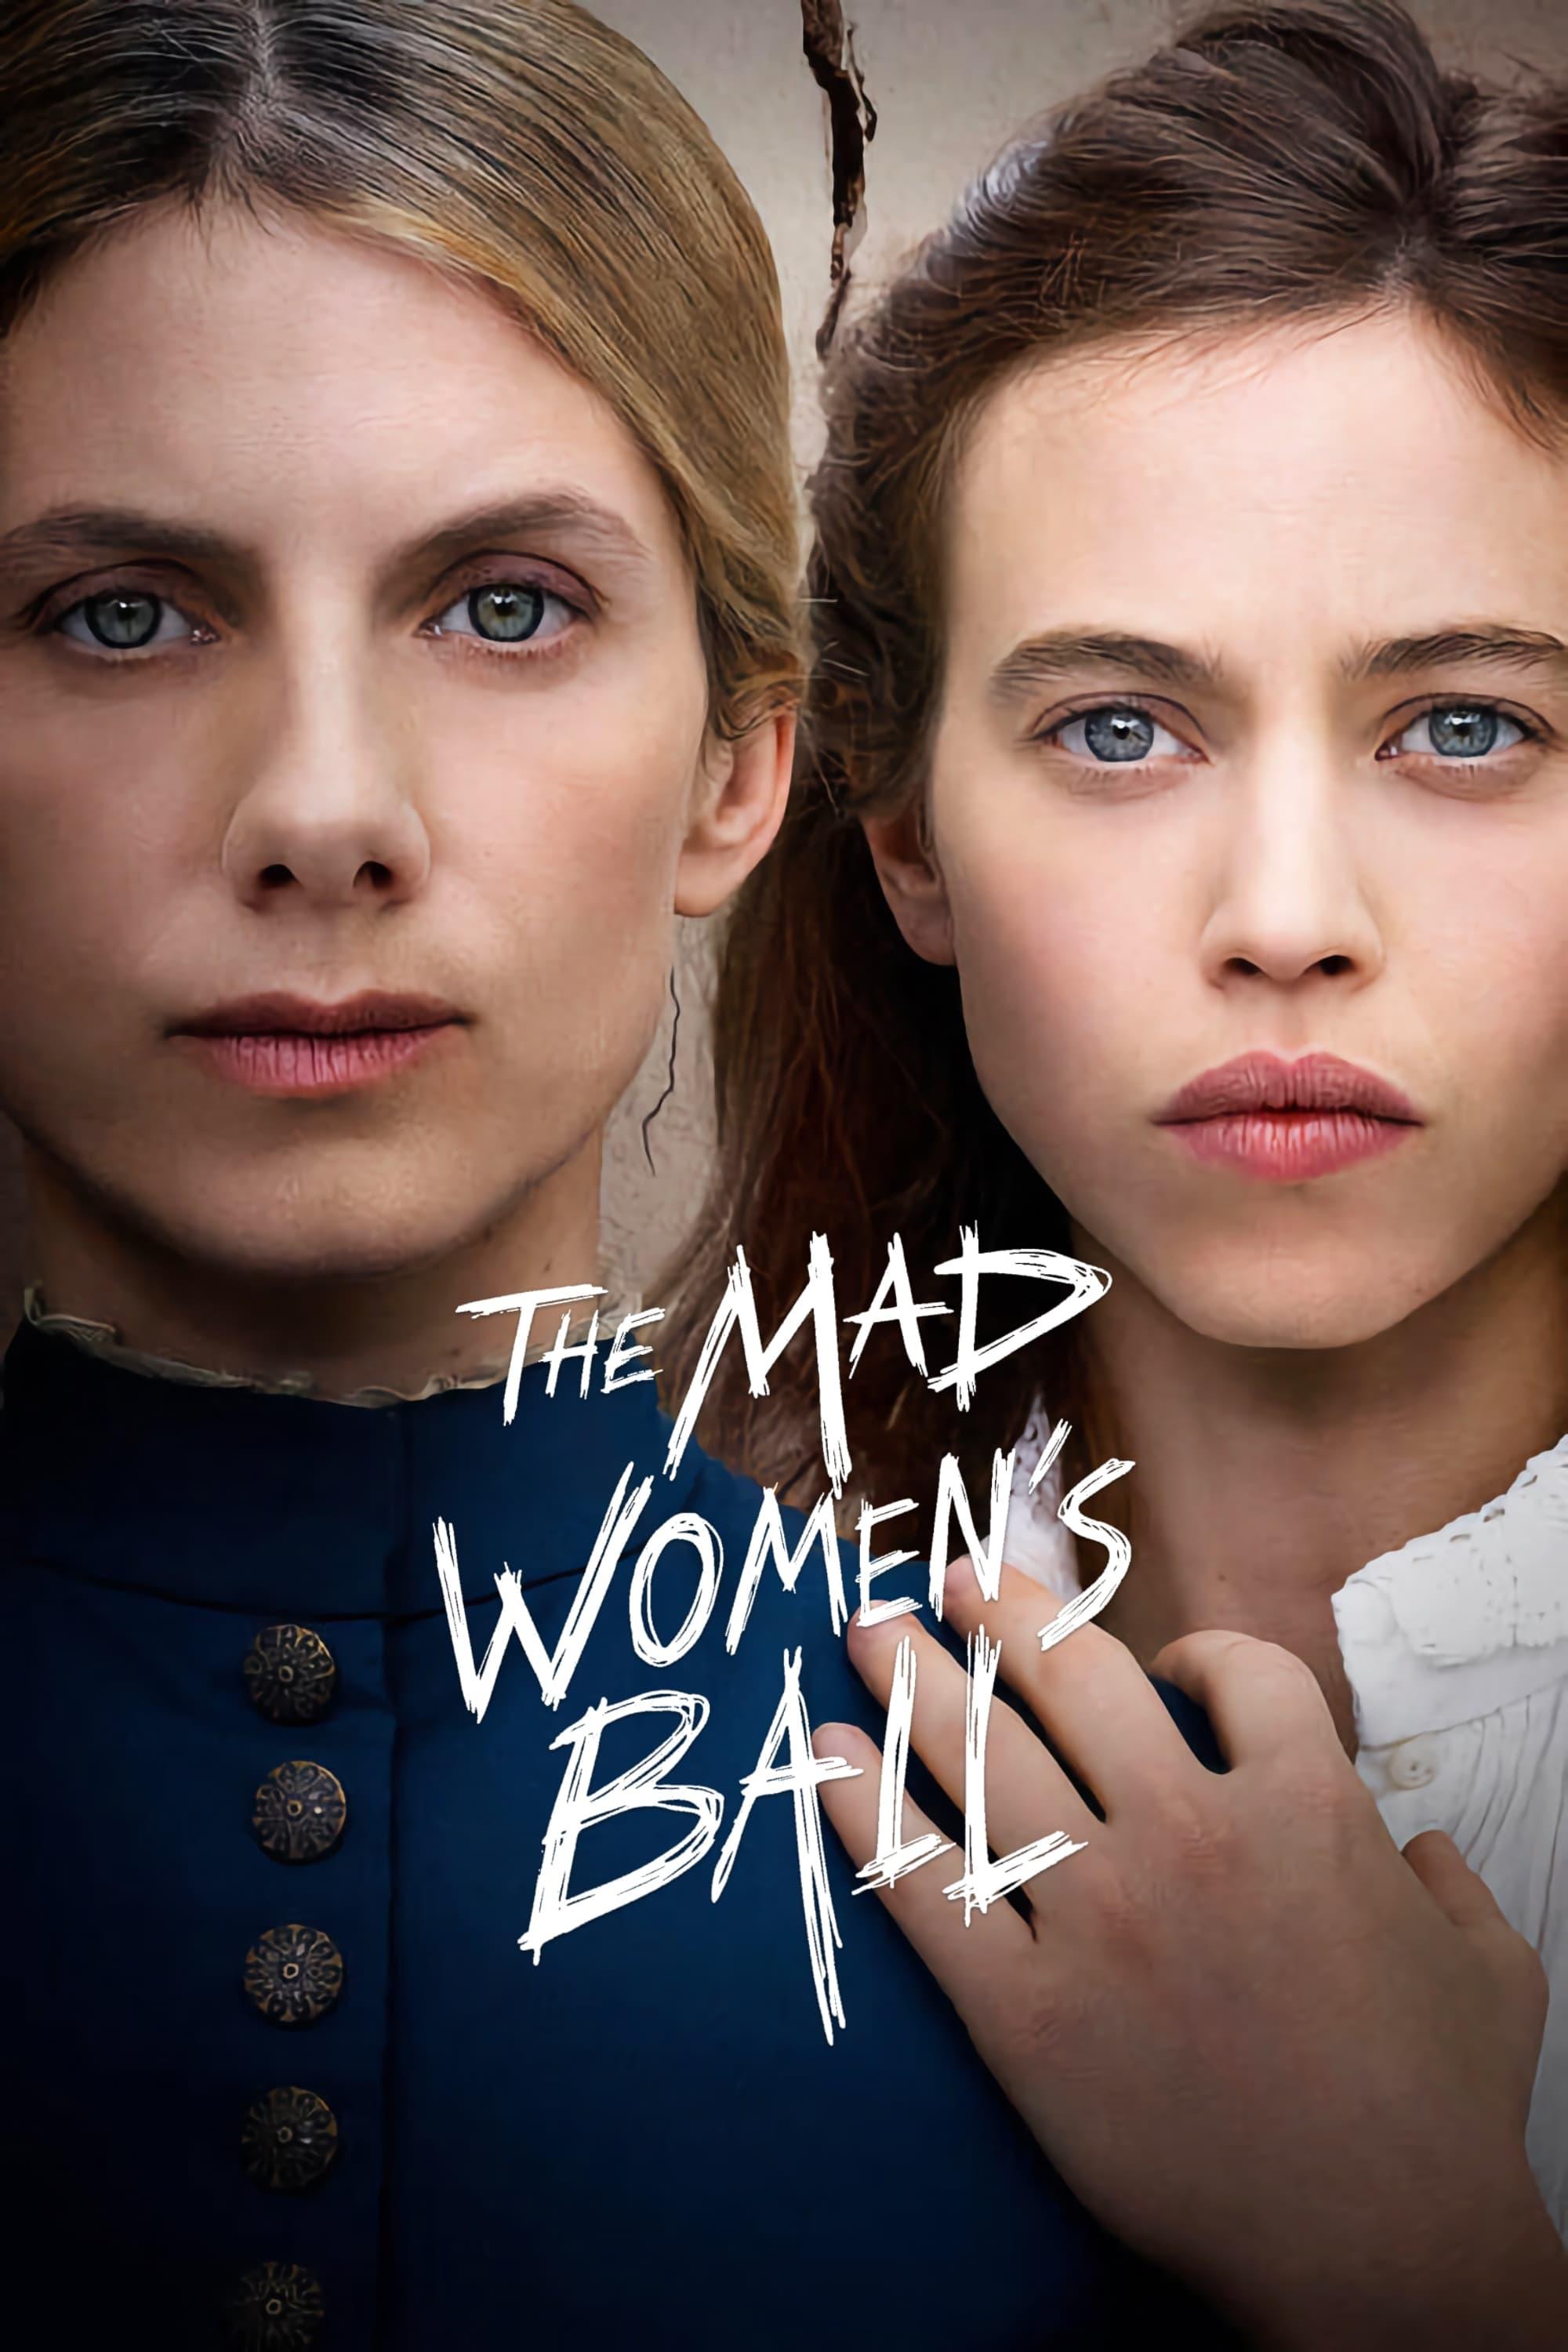 The Mad Women's Ball poster